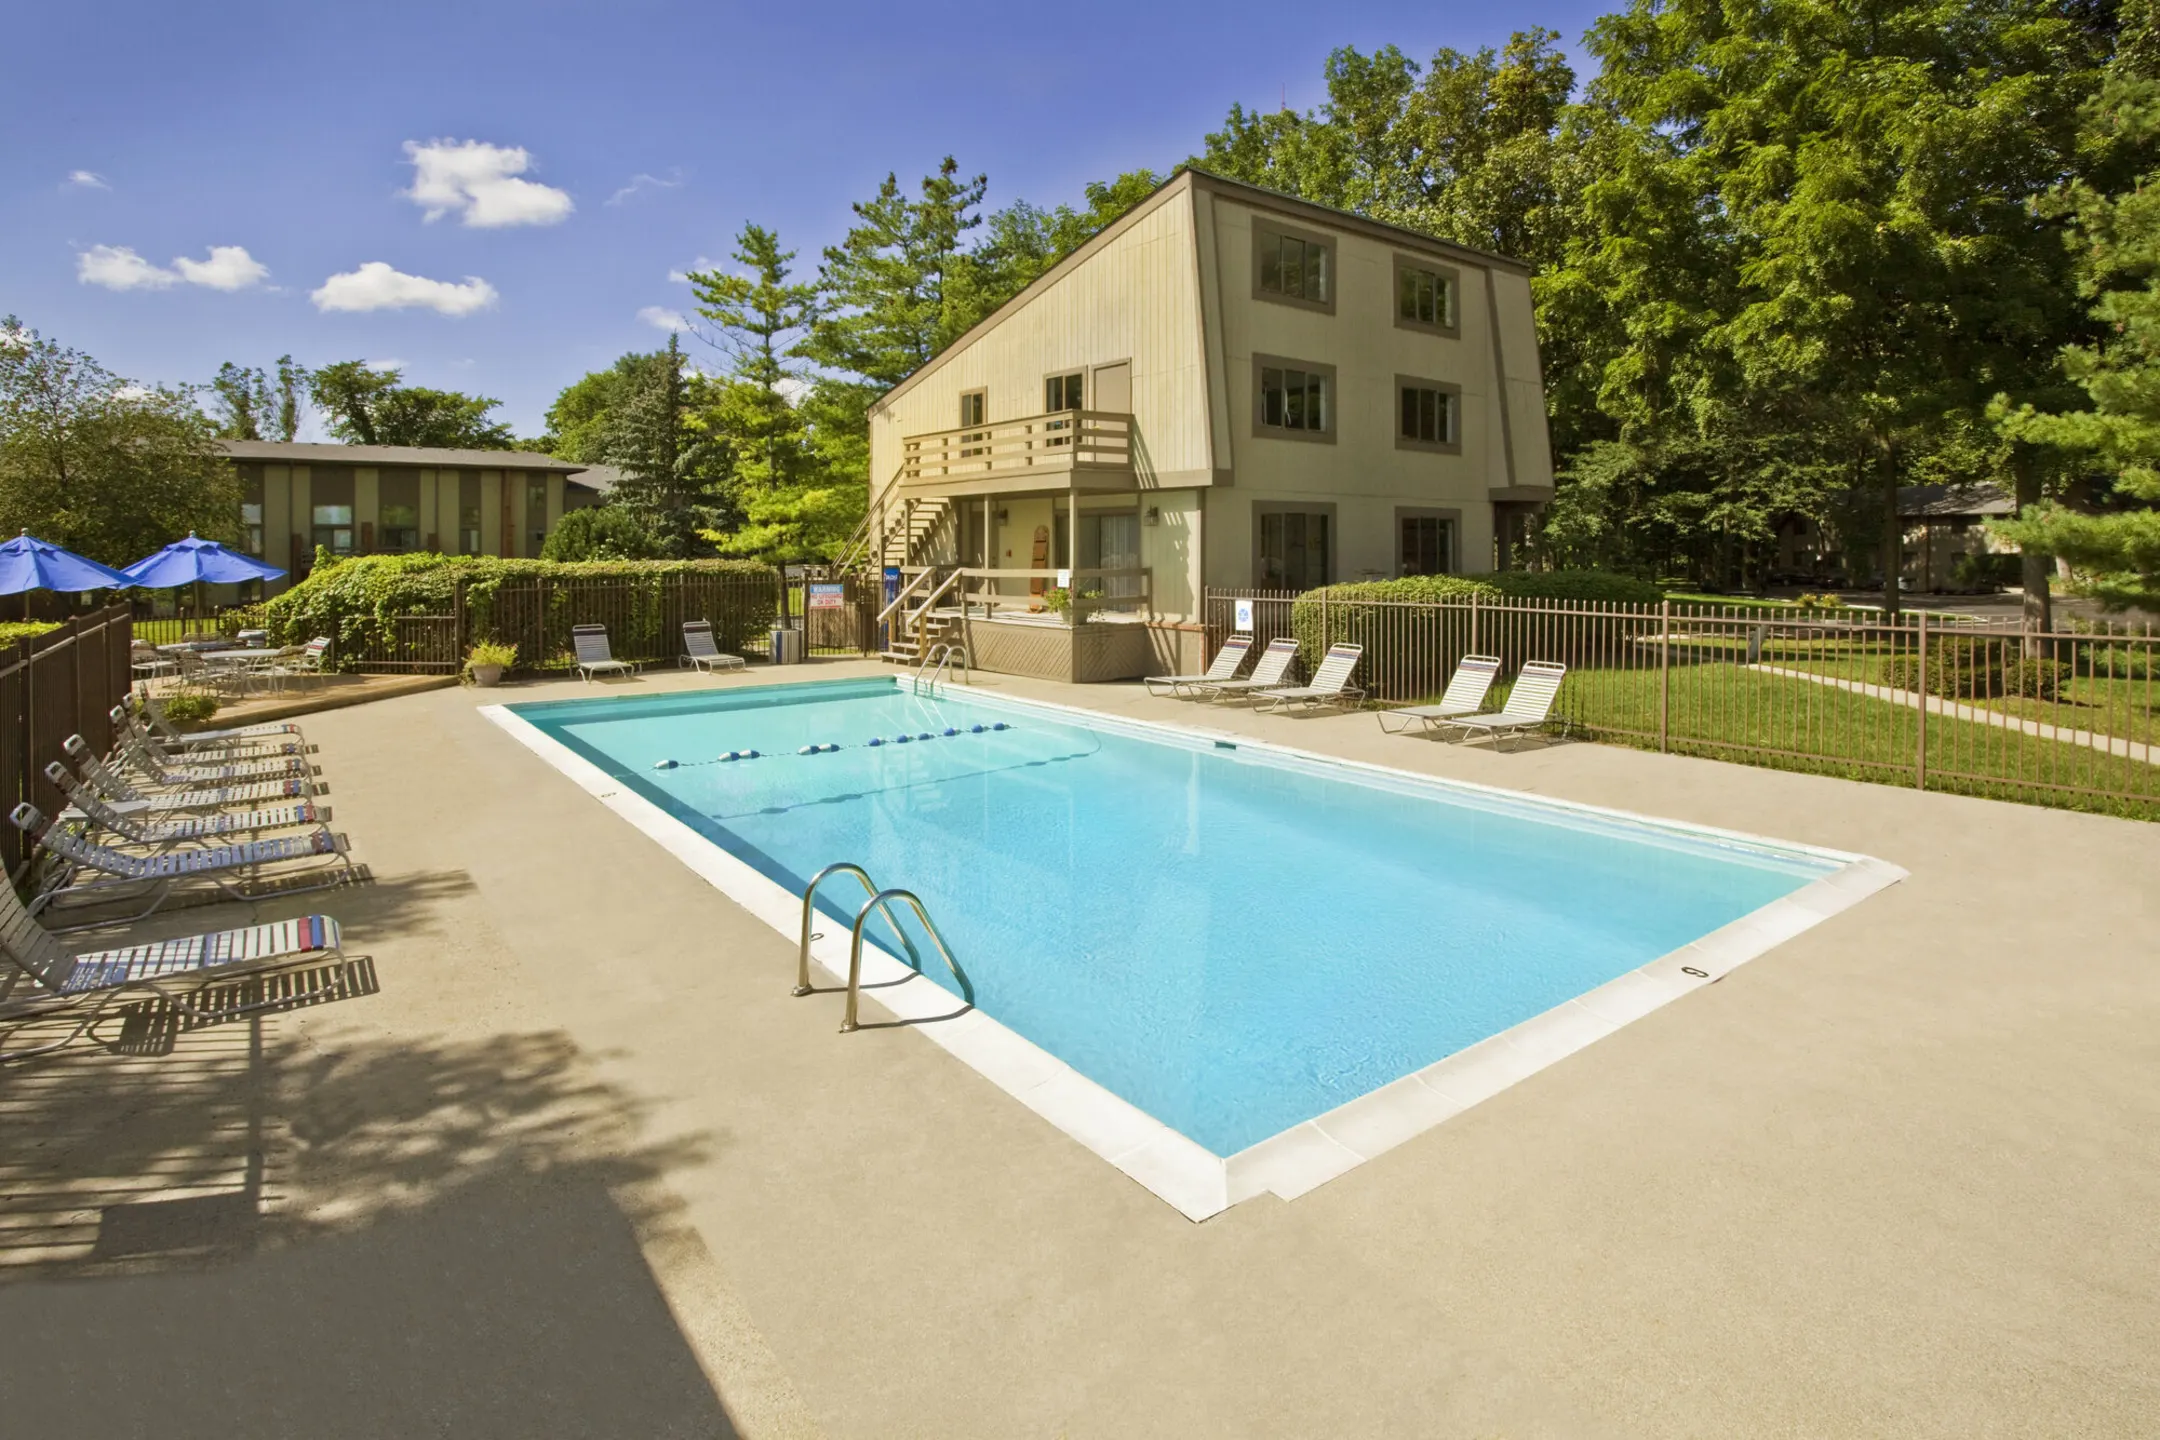 Pool - Landmark Apartments & Townhomes - Indianapolis, IN